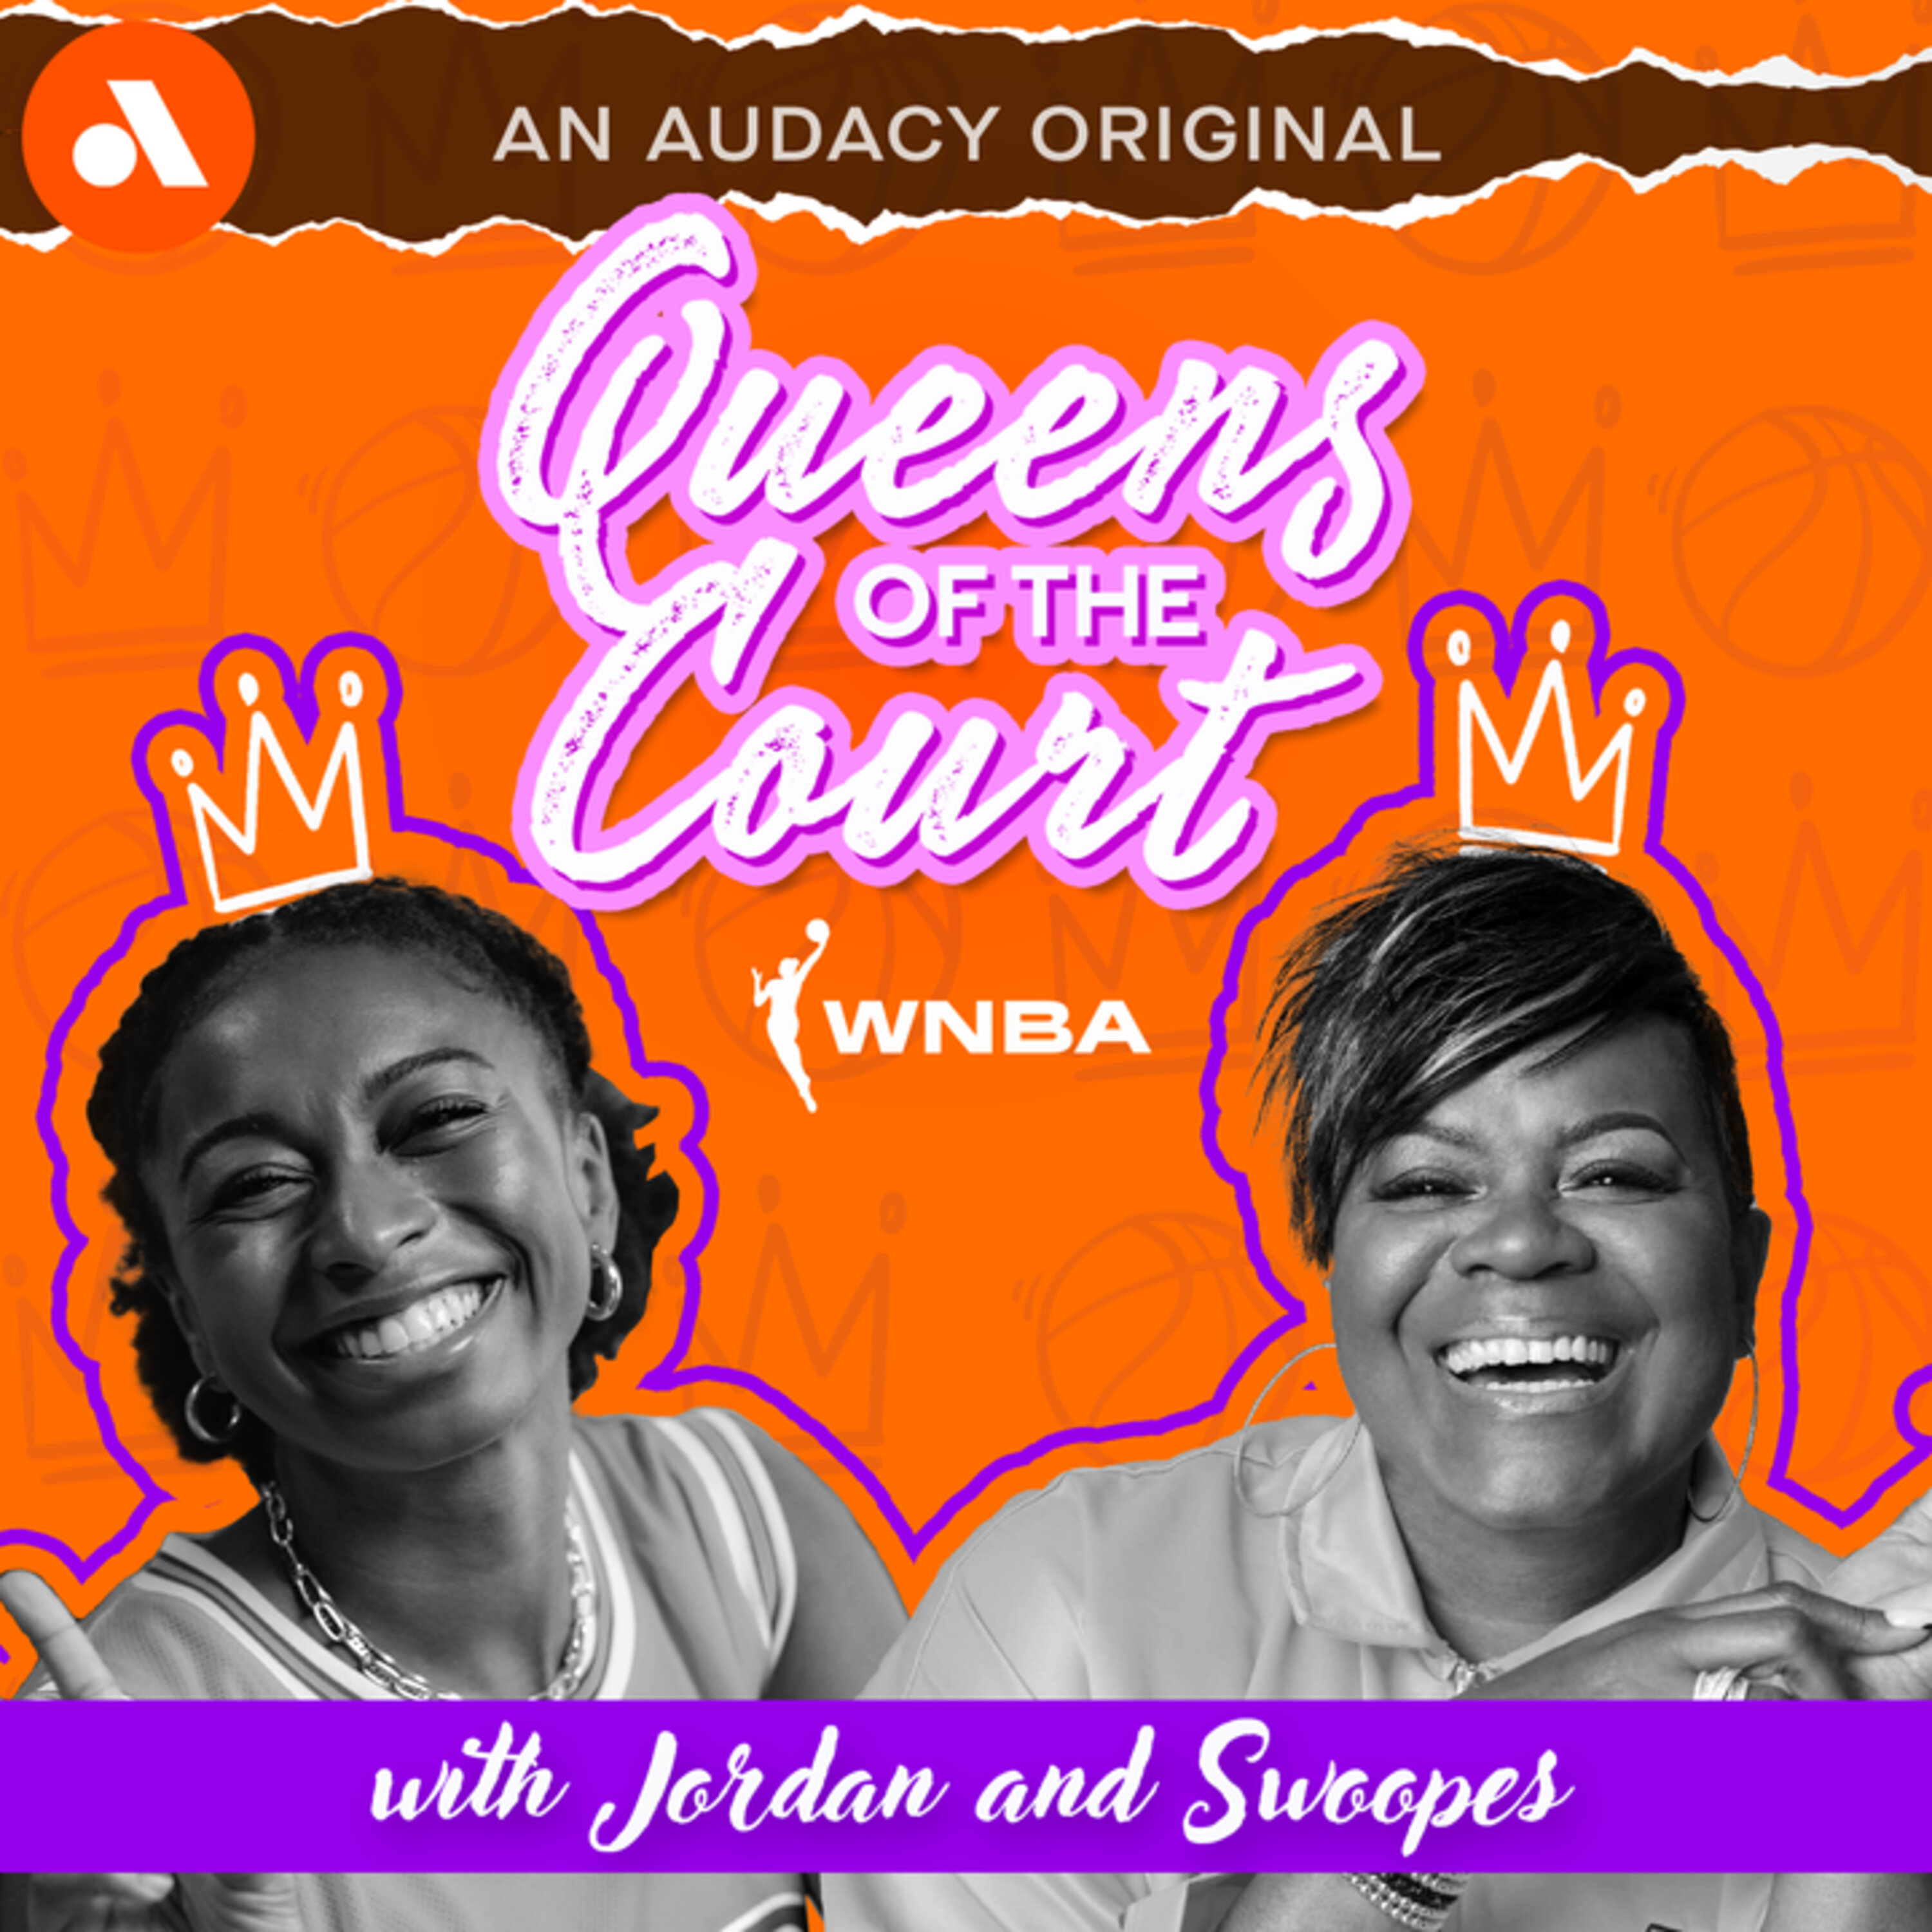 Just So Much Excitement |'Queens of the Court'